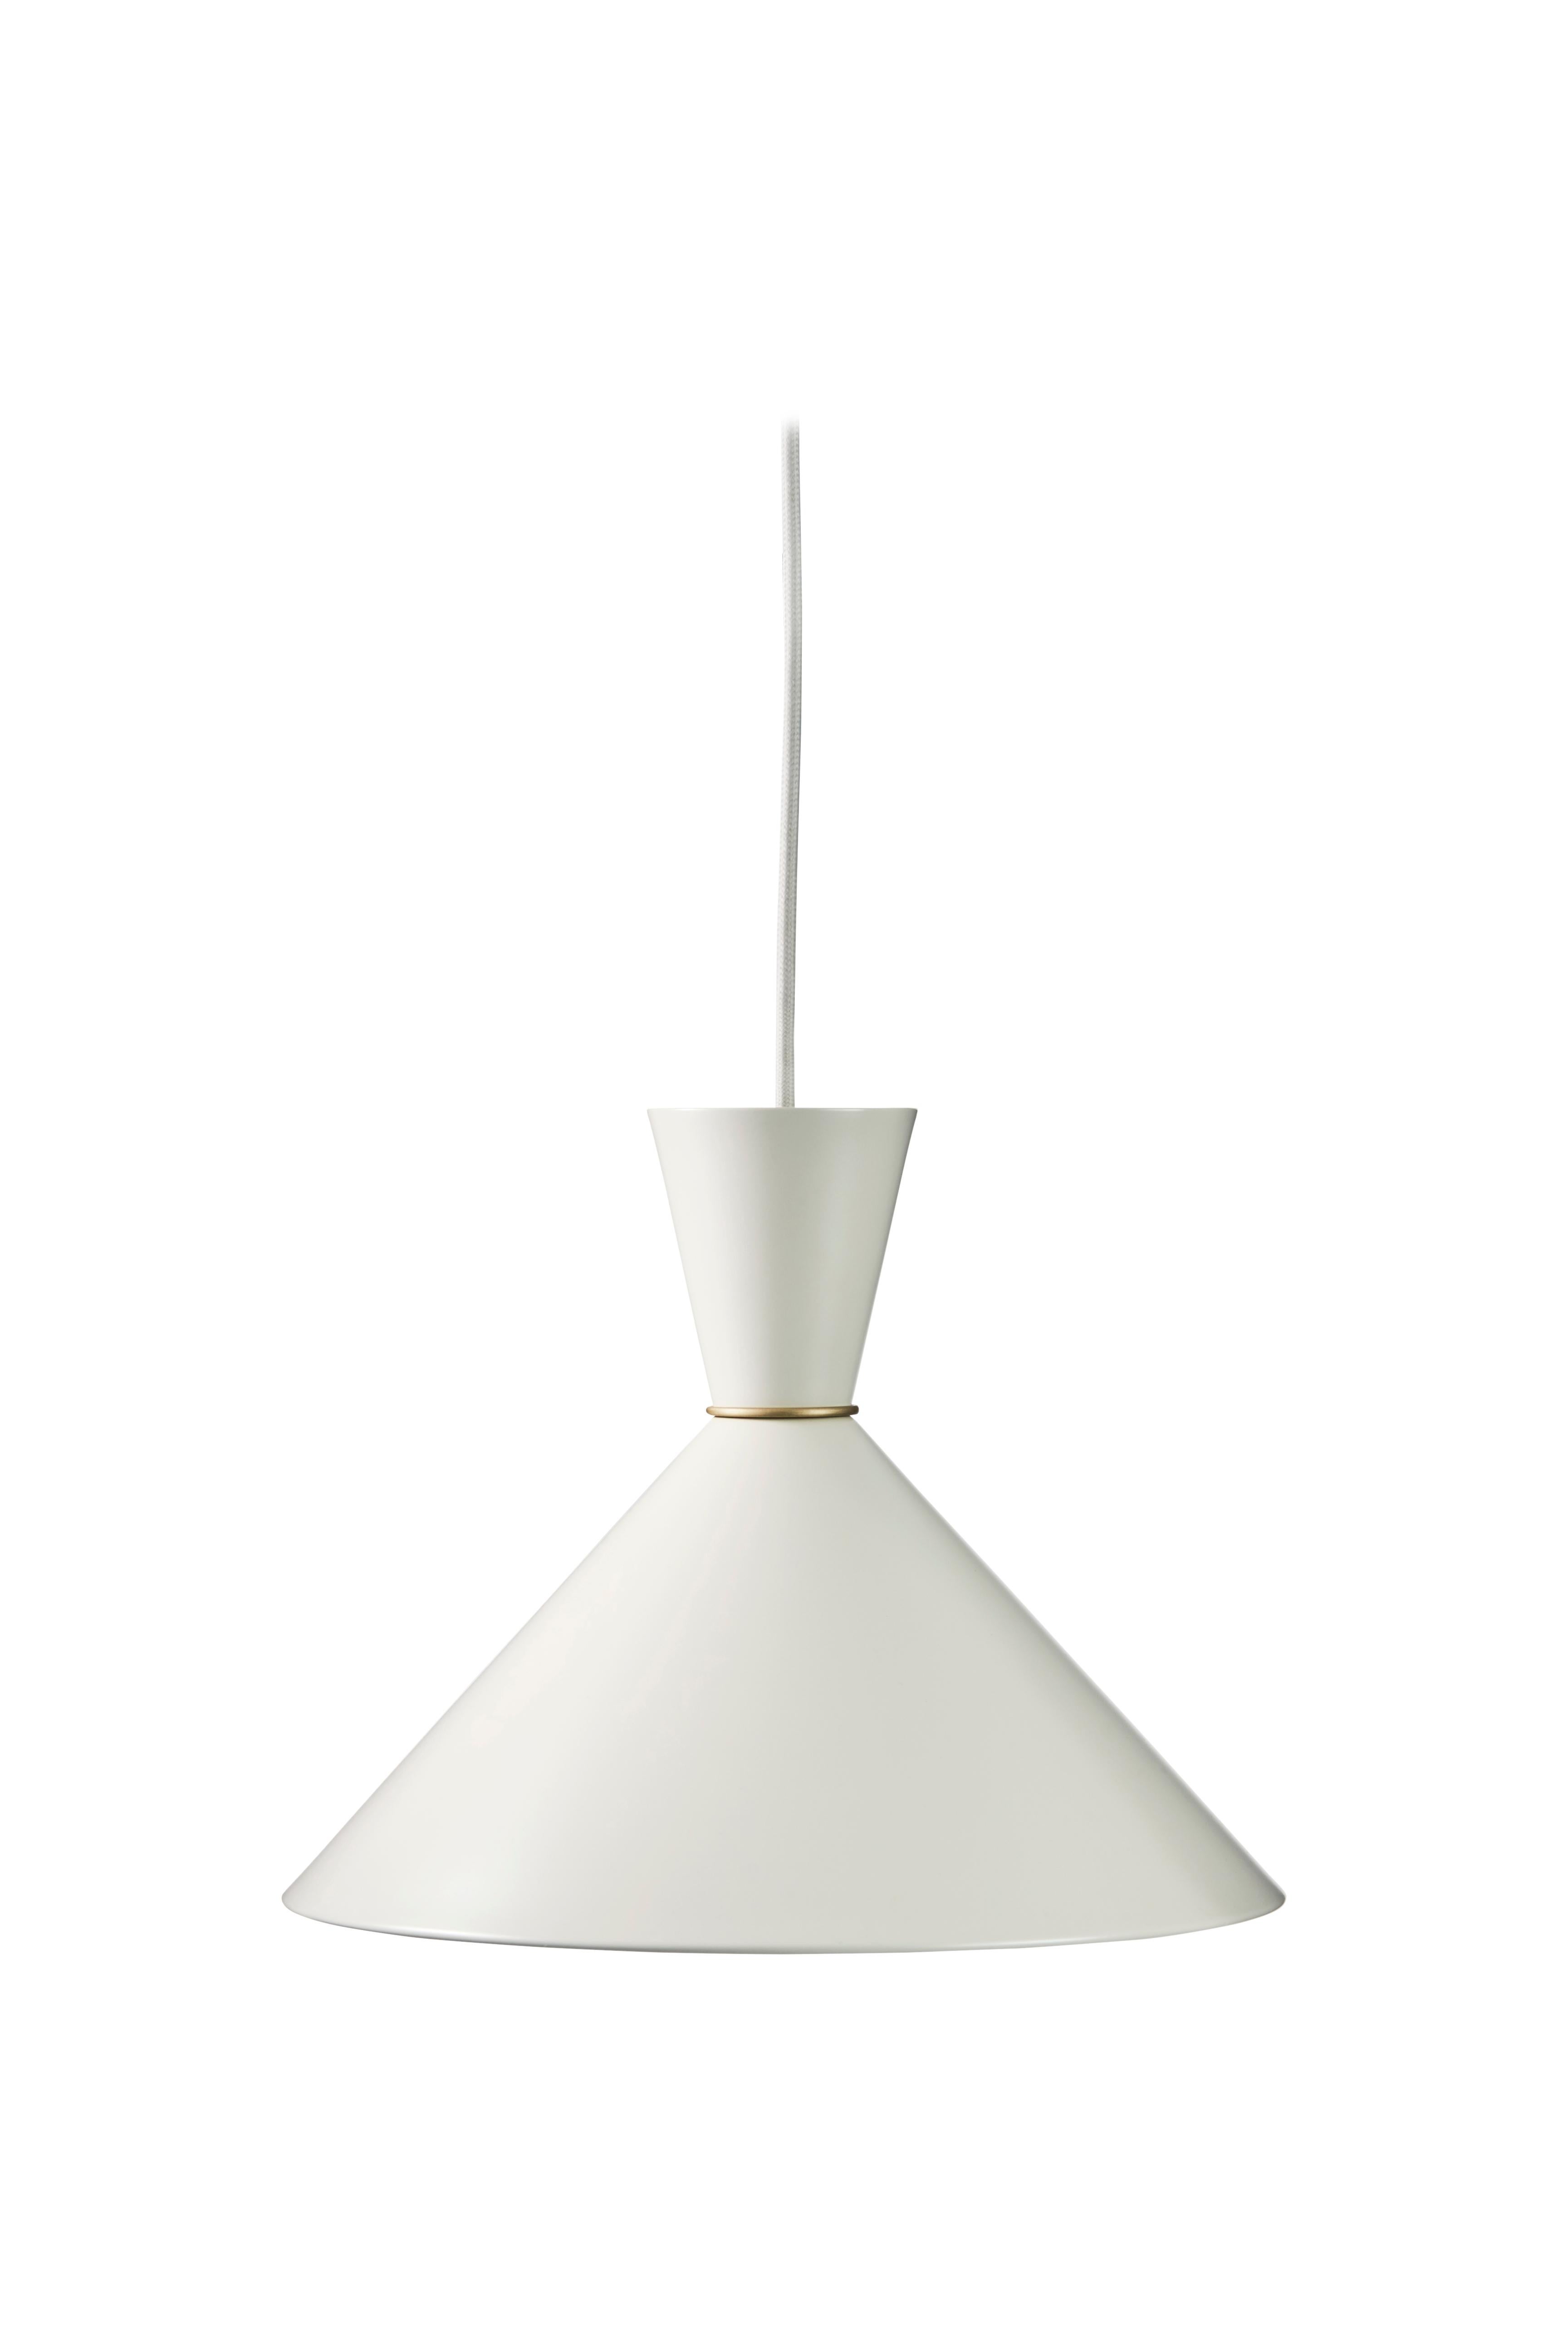 For Sale: White (Warm White) Bloom Pendant Lamp, by Svend Aage Holm Sorensen from Warm Nordic